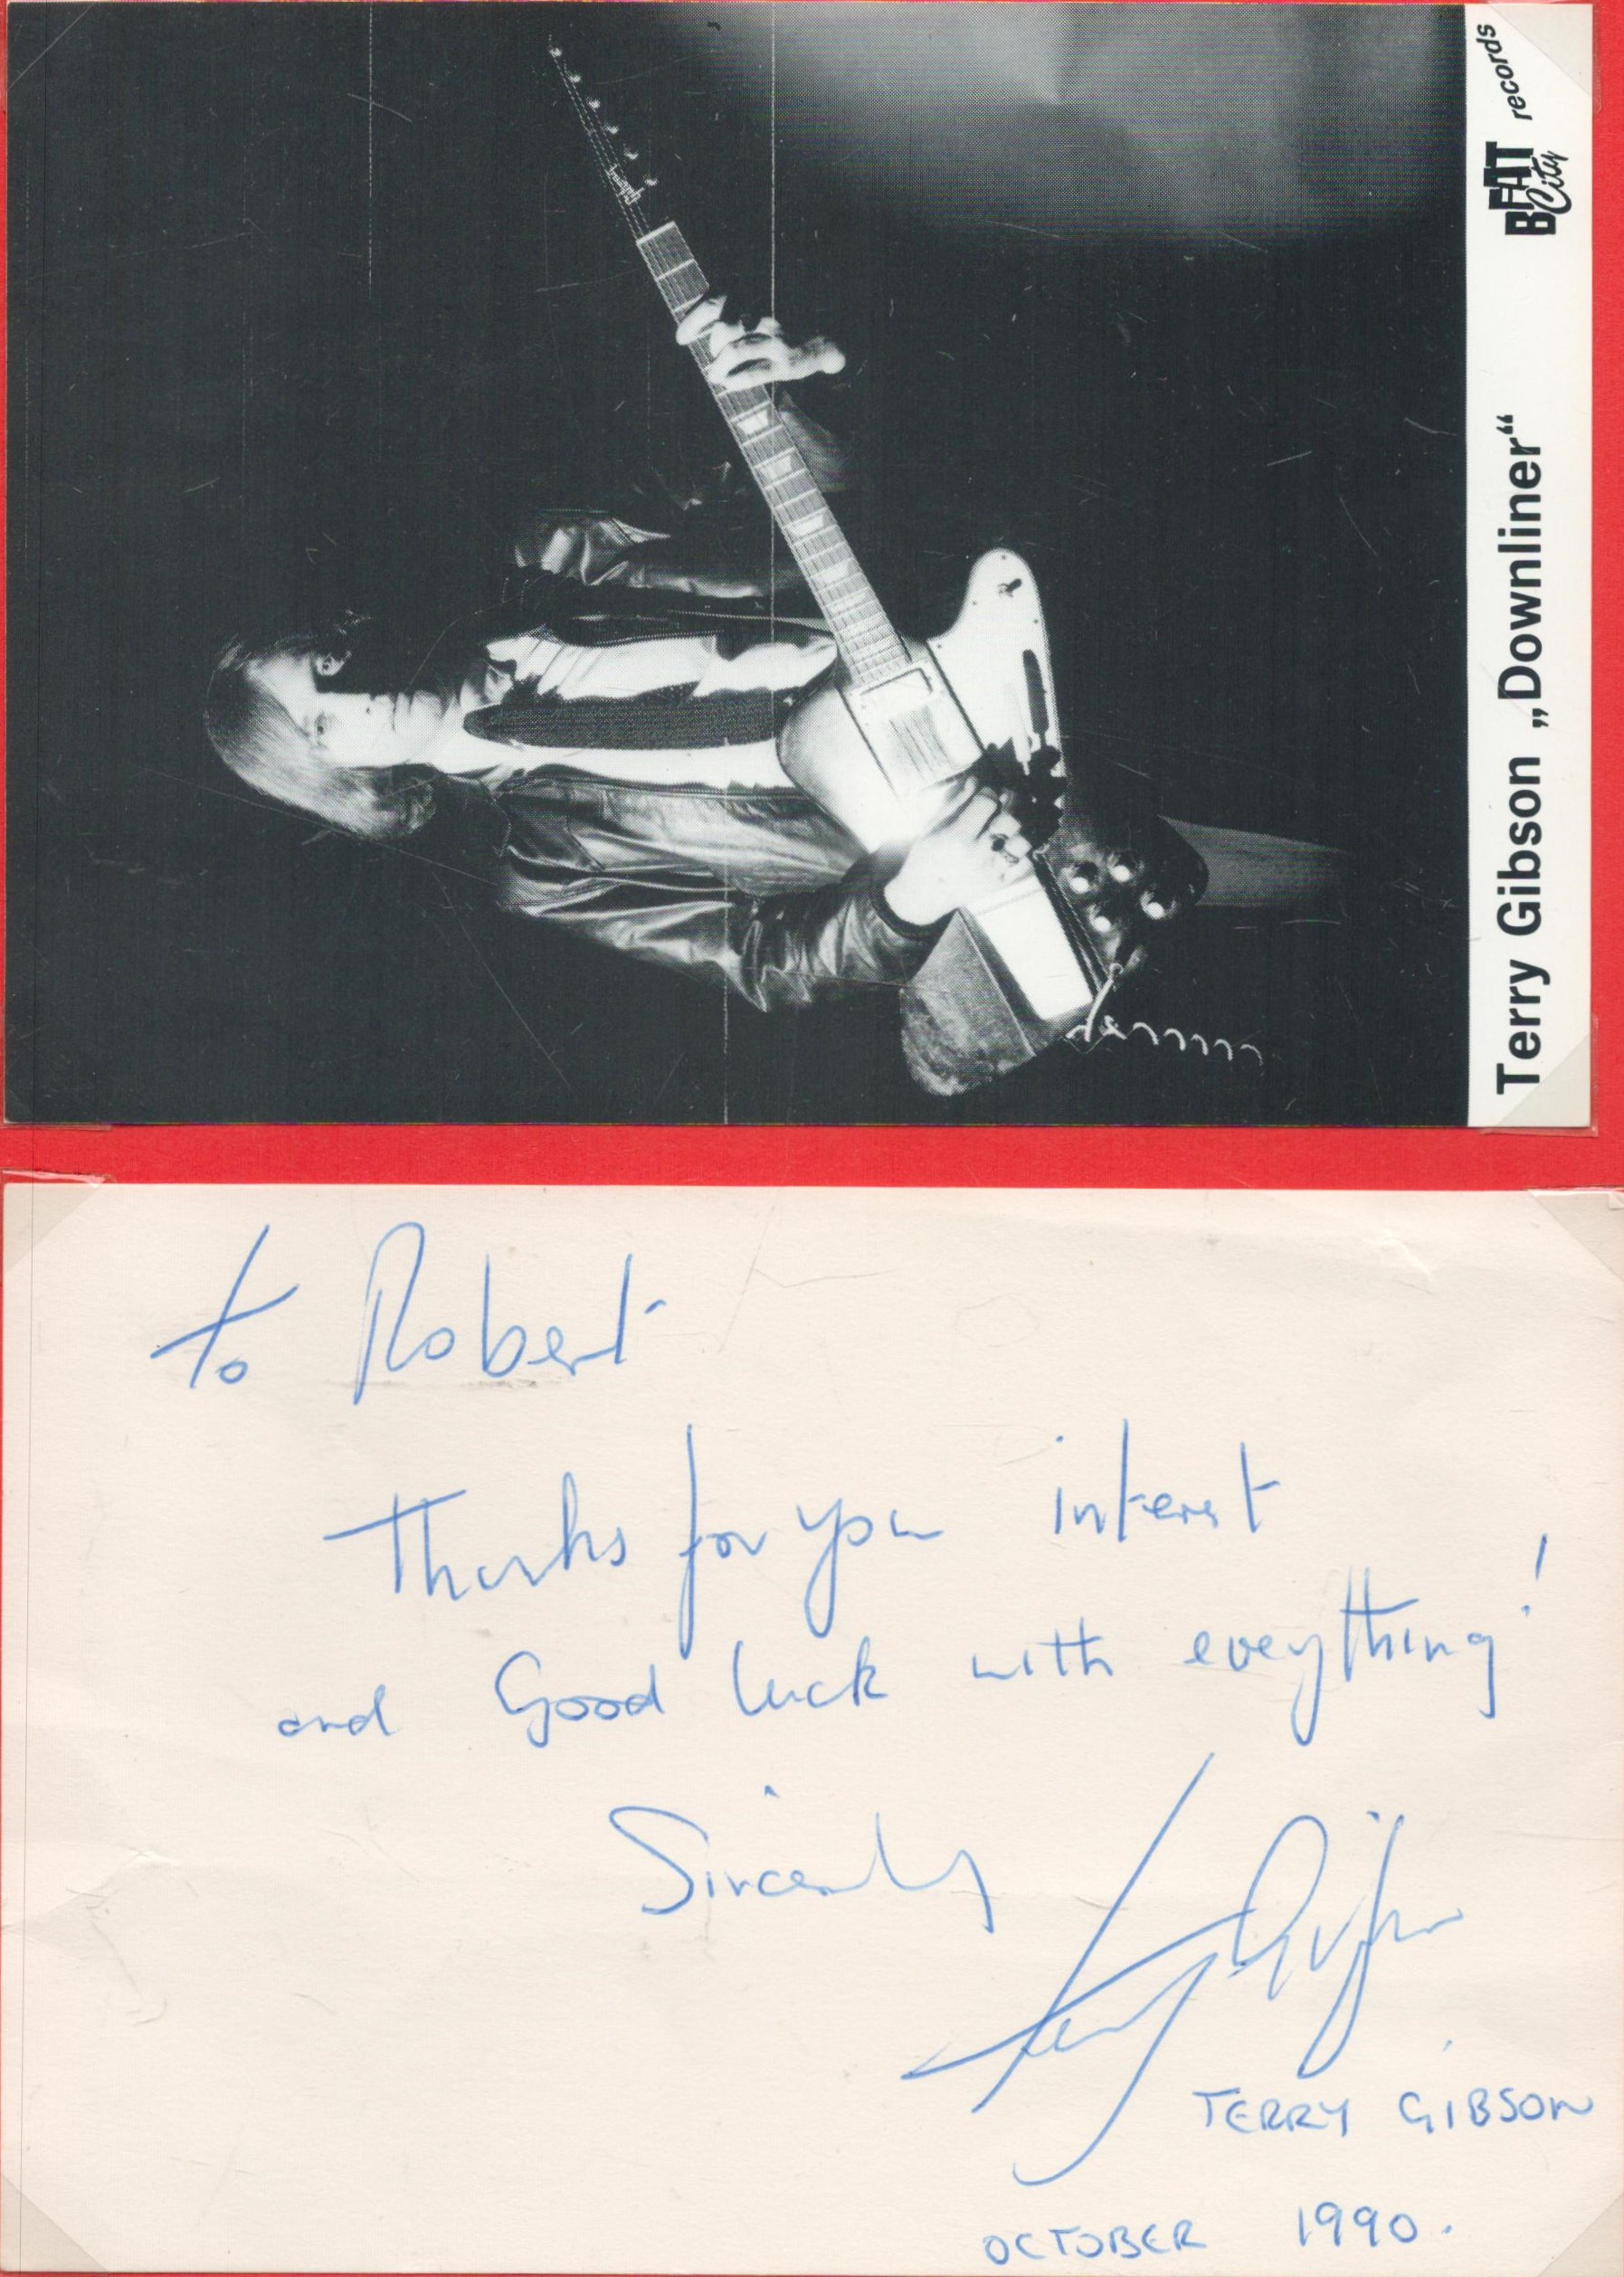 Terry Gibson signed 6x4 inch album page dated 0ct 1990 and Downliner 6x4 inch black and white